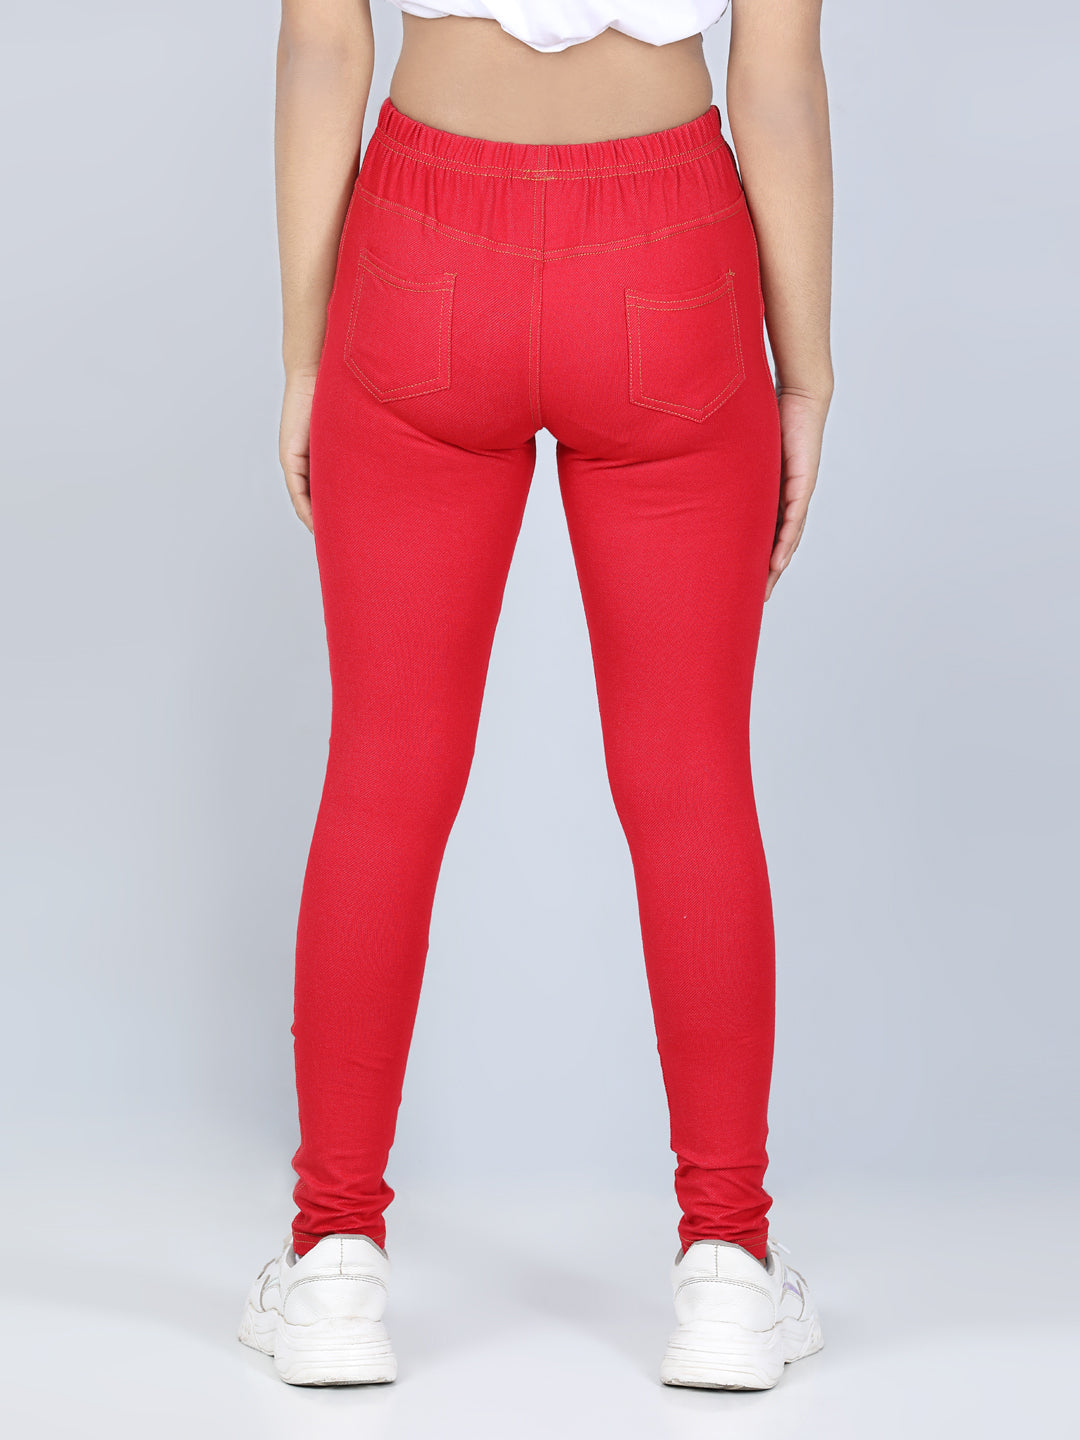 Girls Cotton Jeggings-Red